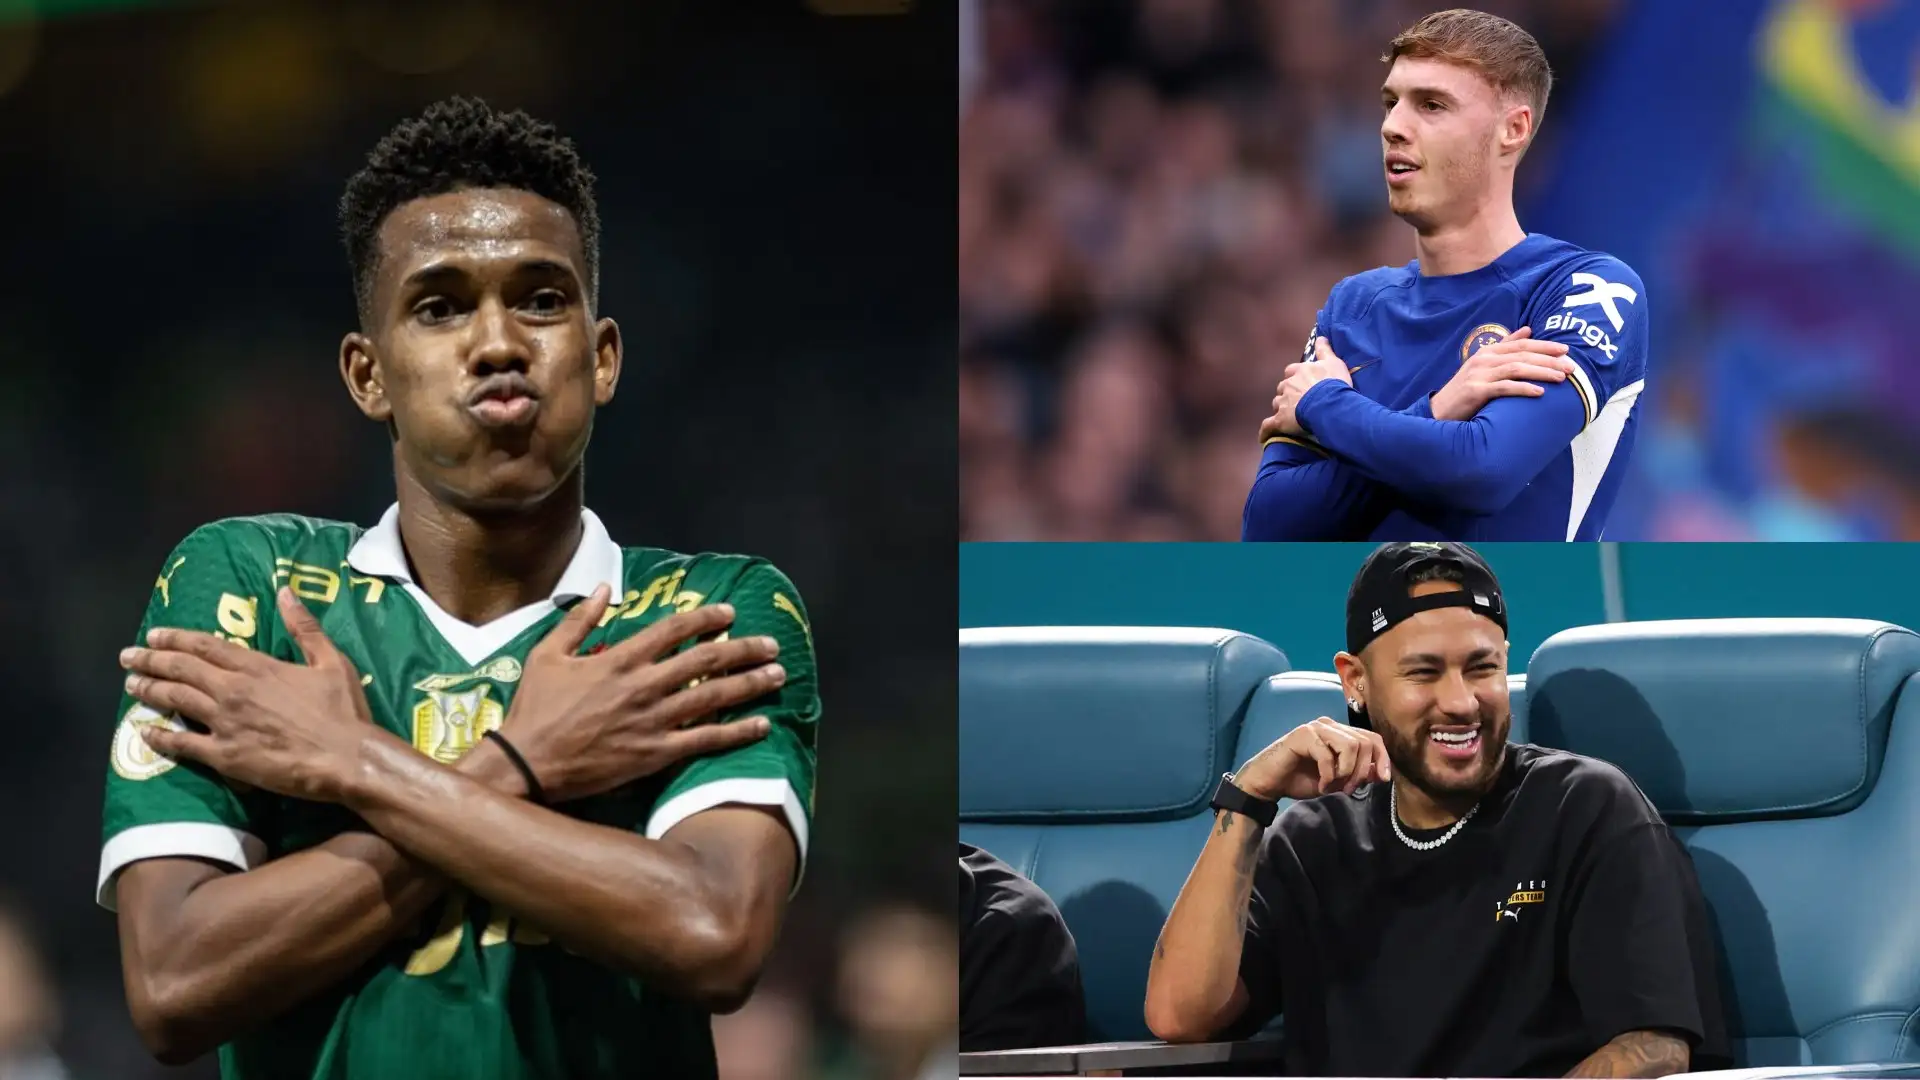 VIDEO: Palmeiras wonderkid Estevao Willian hits Cole Palmer's 'cold' celebration as he scores after finally sealing Chelsea transfer - with Blues star reacting on social media and Neymar lauding his performance